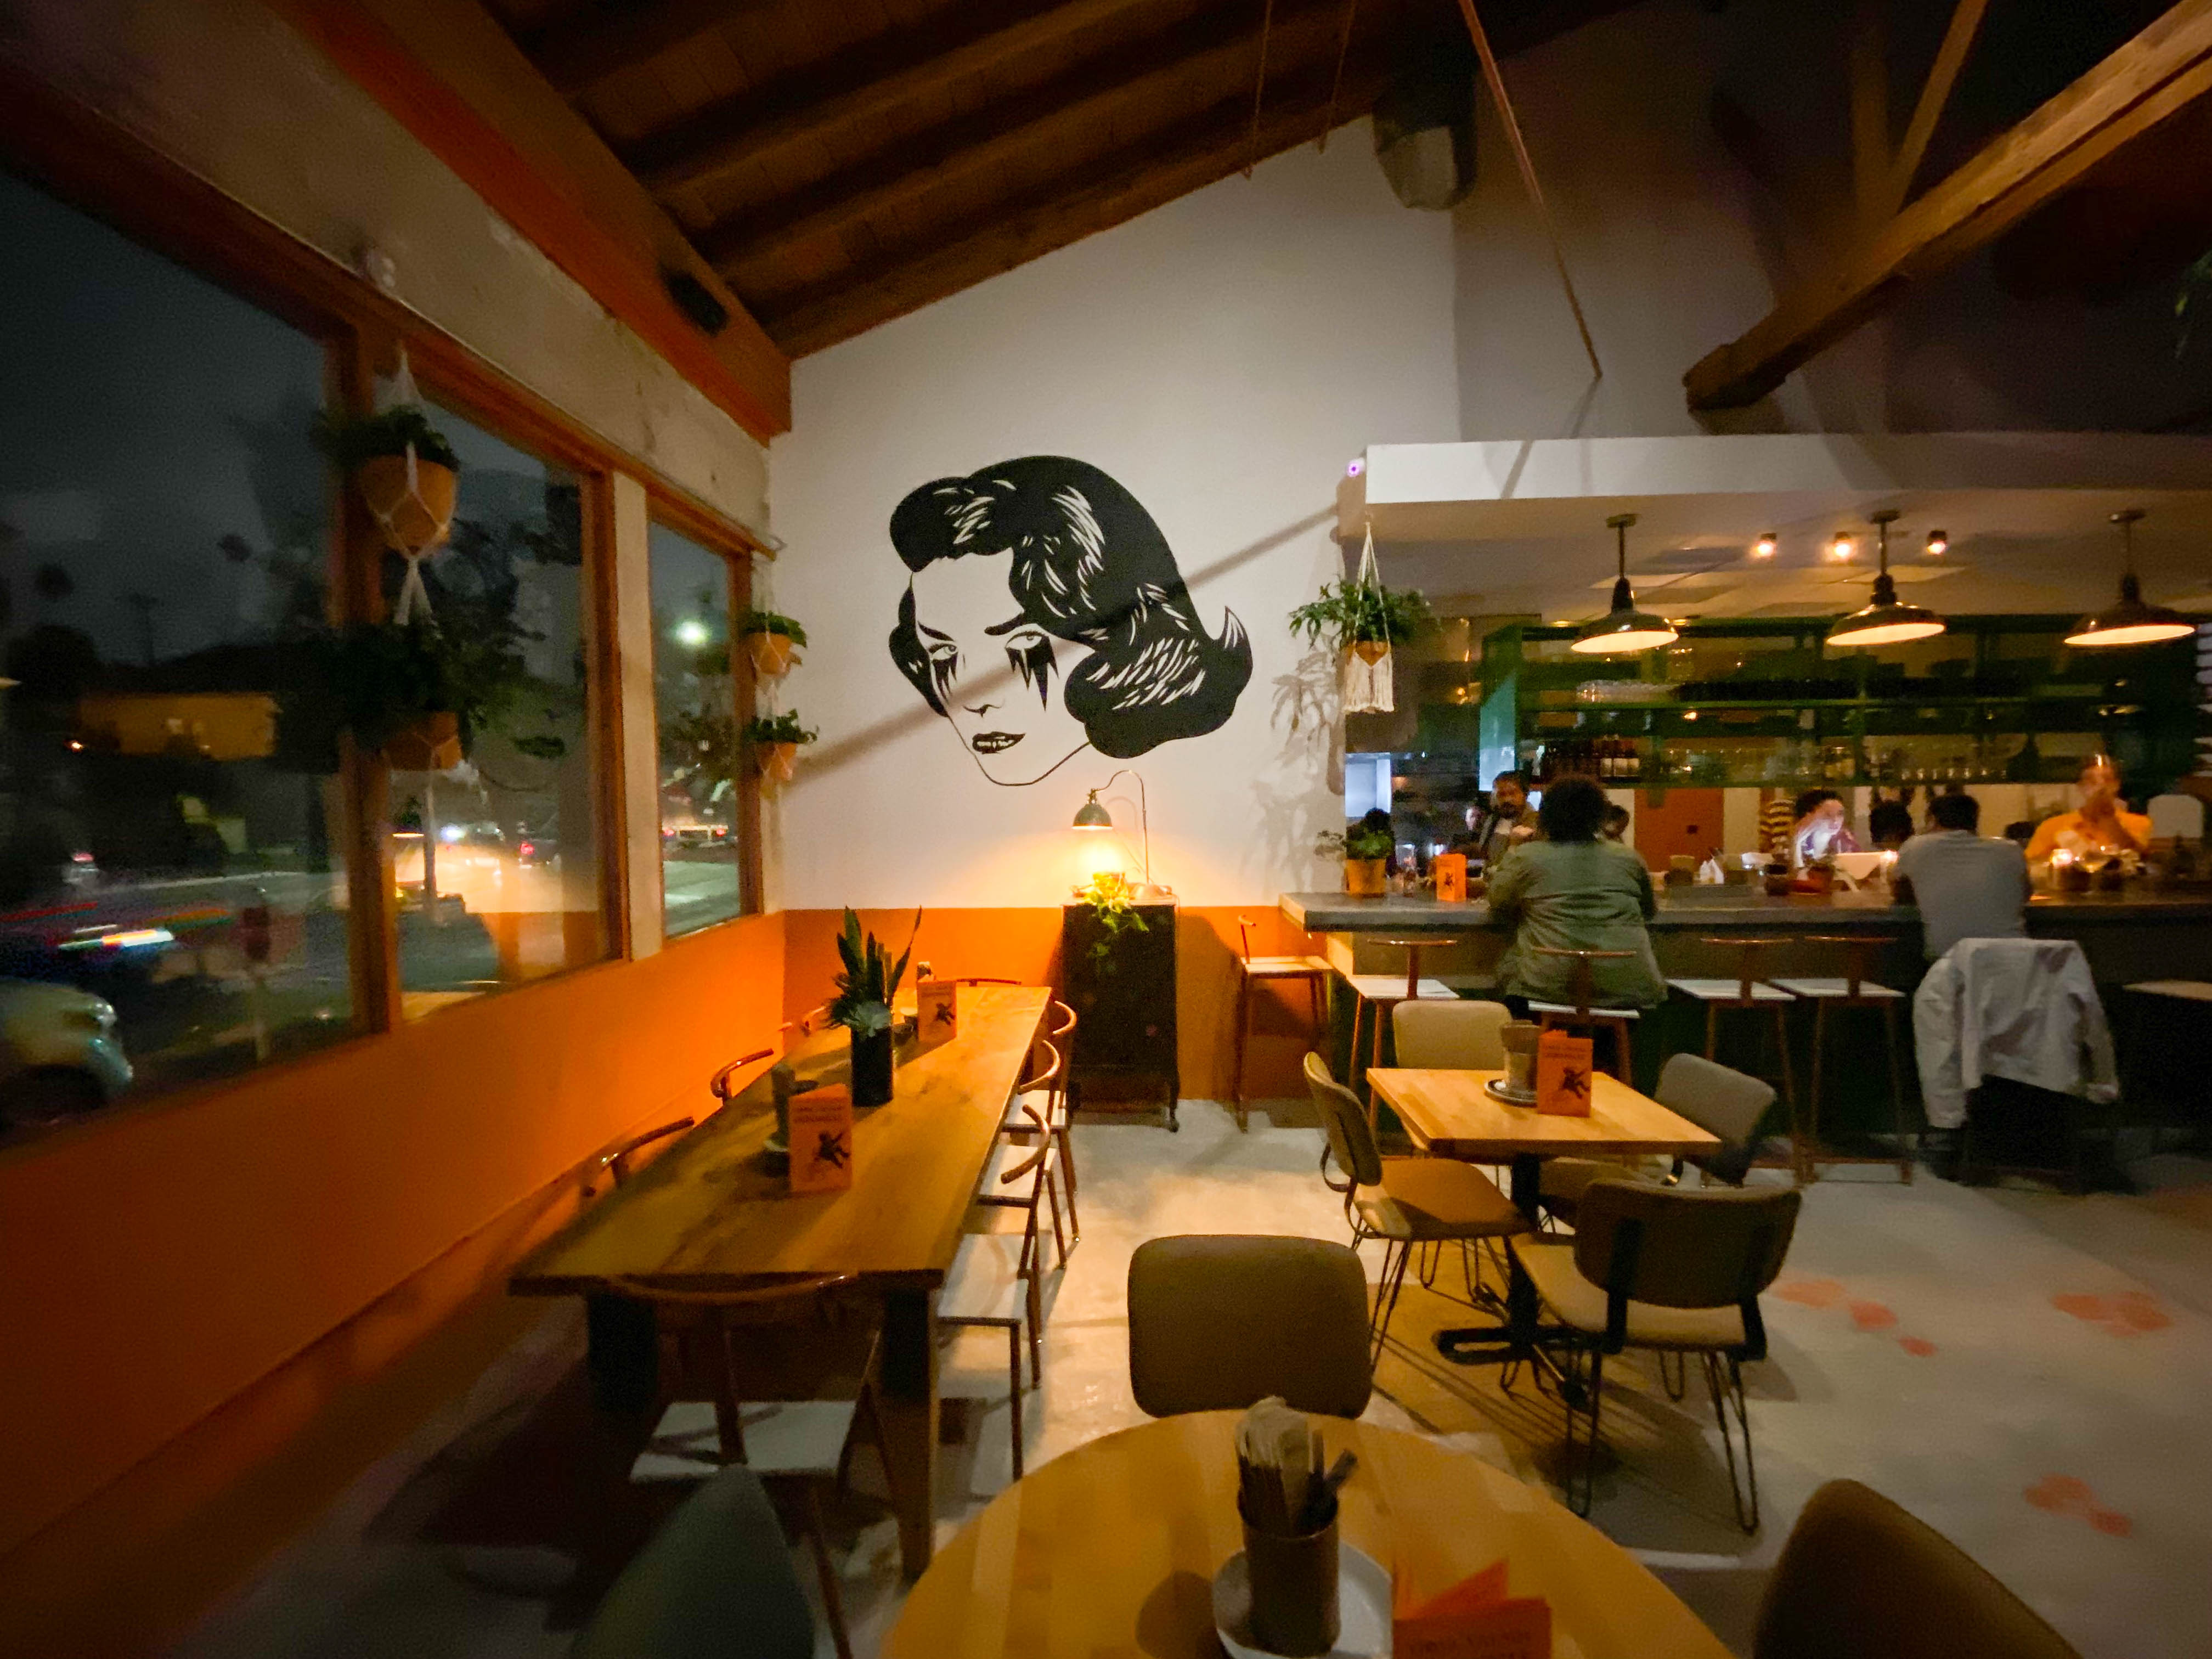 A dinnertime restaurant with mood lighting highlights a mural of a crying woman.